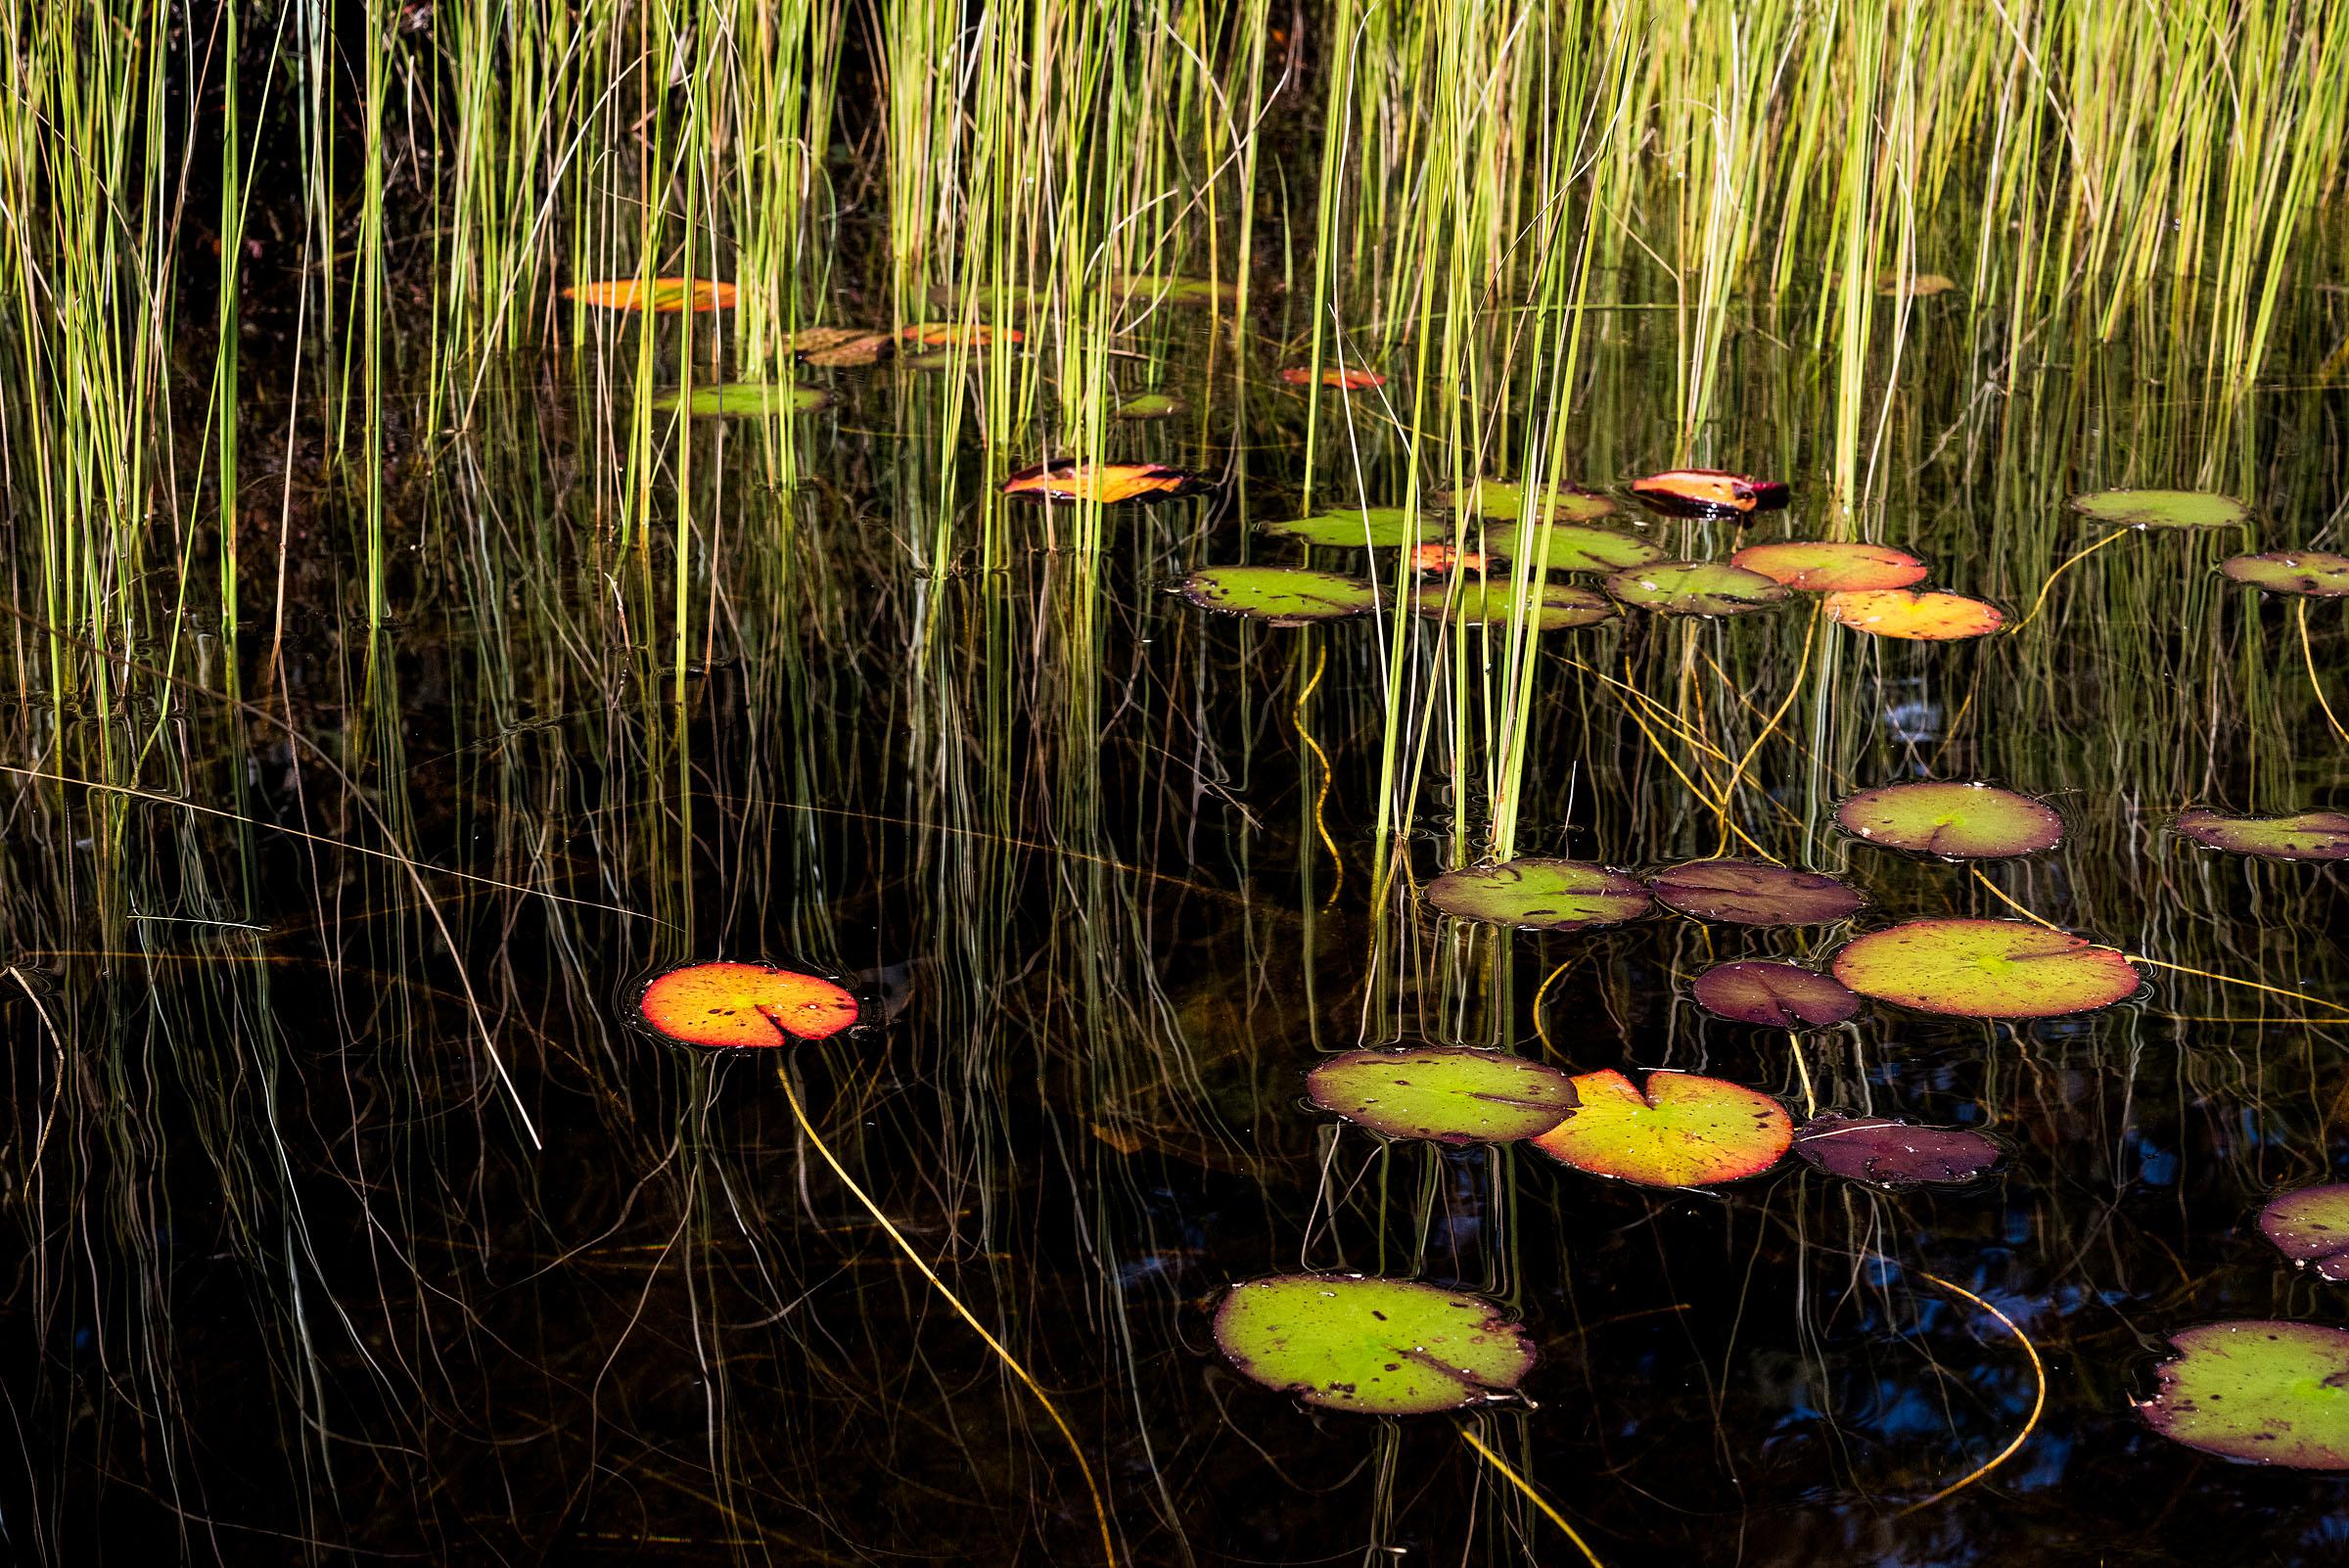 Sage Sohier Landscape Photograph – Lily Pads, Photograph, Abstract Landscape, Reflections on New Hampshire Pond 